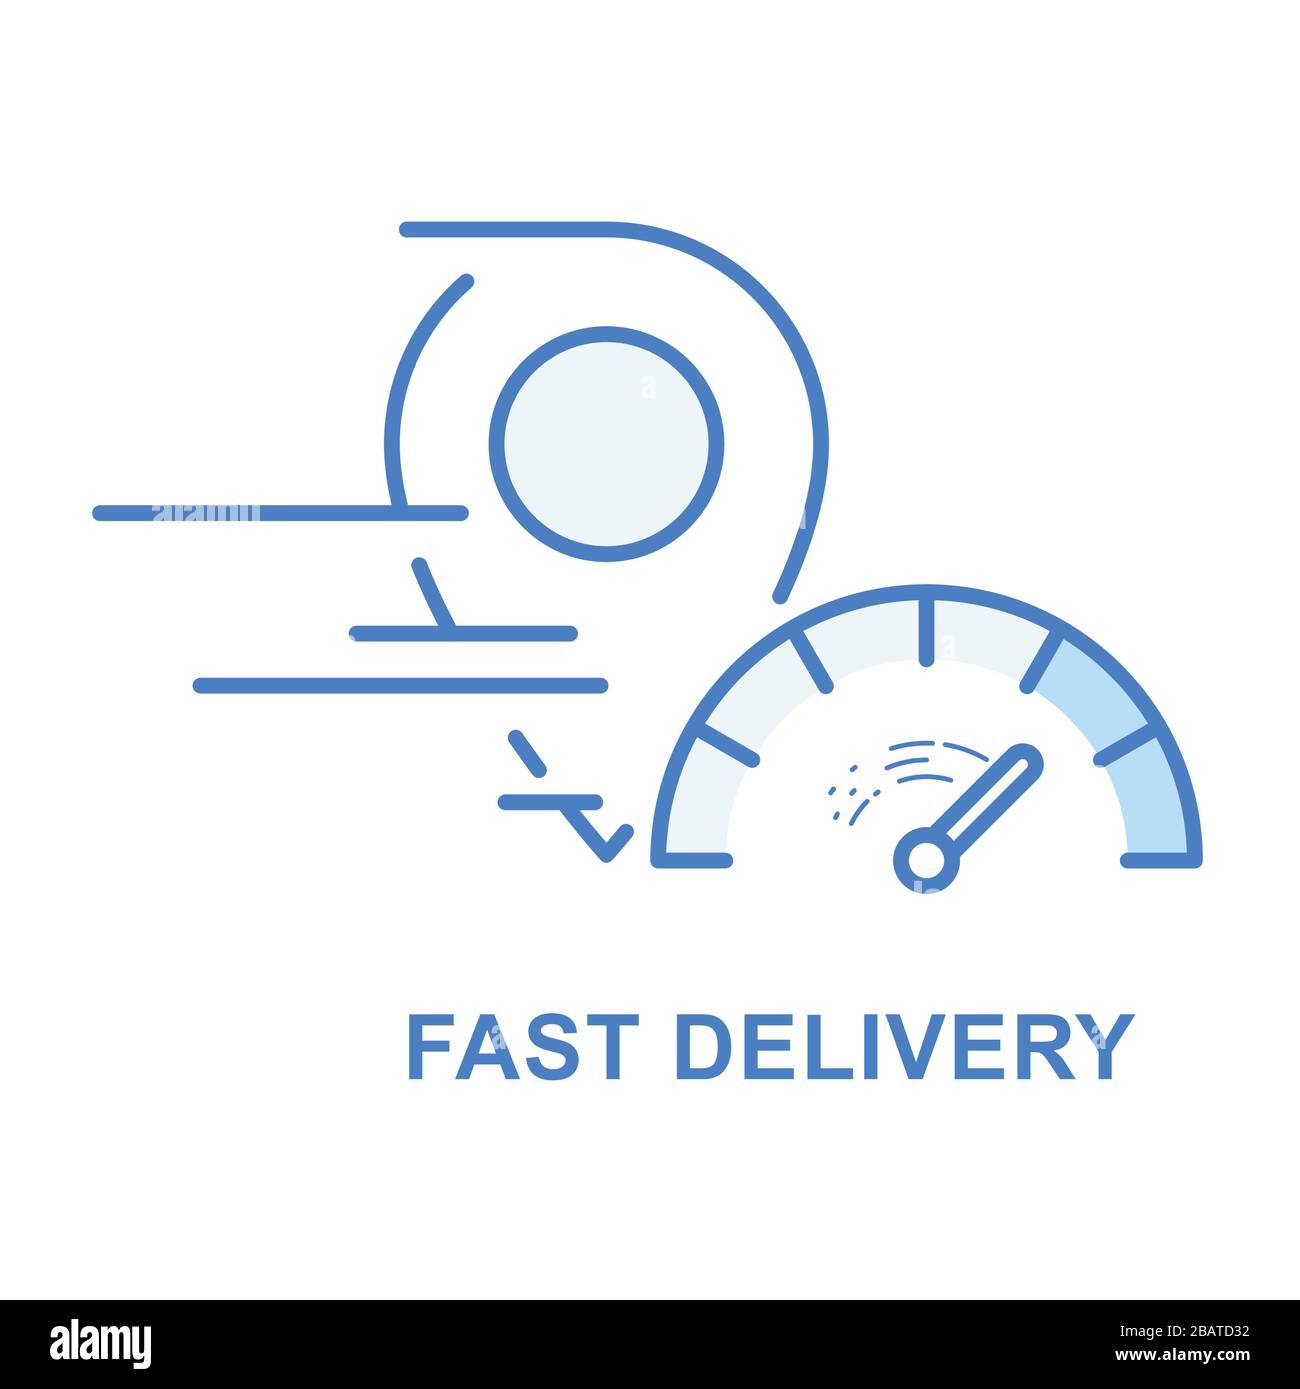 Fast delivery and speedy shipping icon - location marker and speedometer Stock Vector